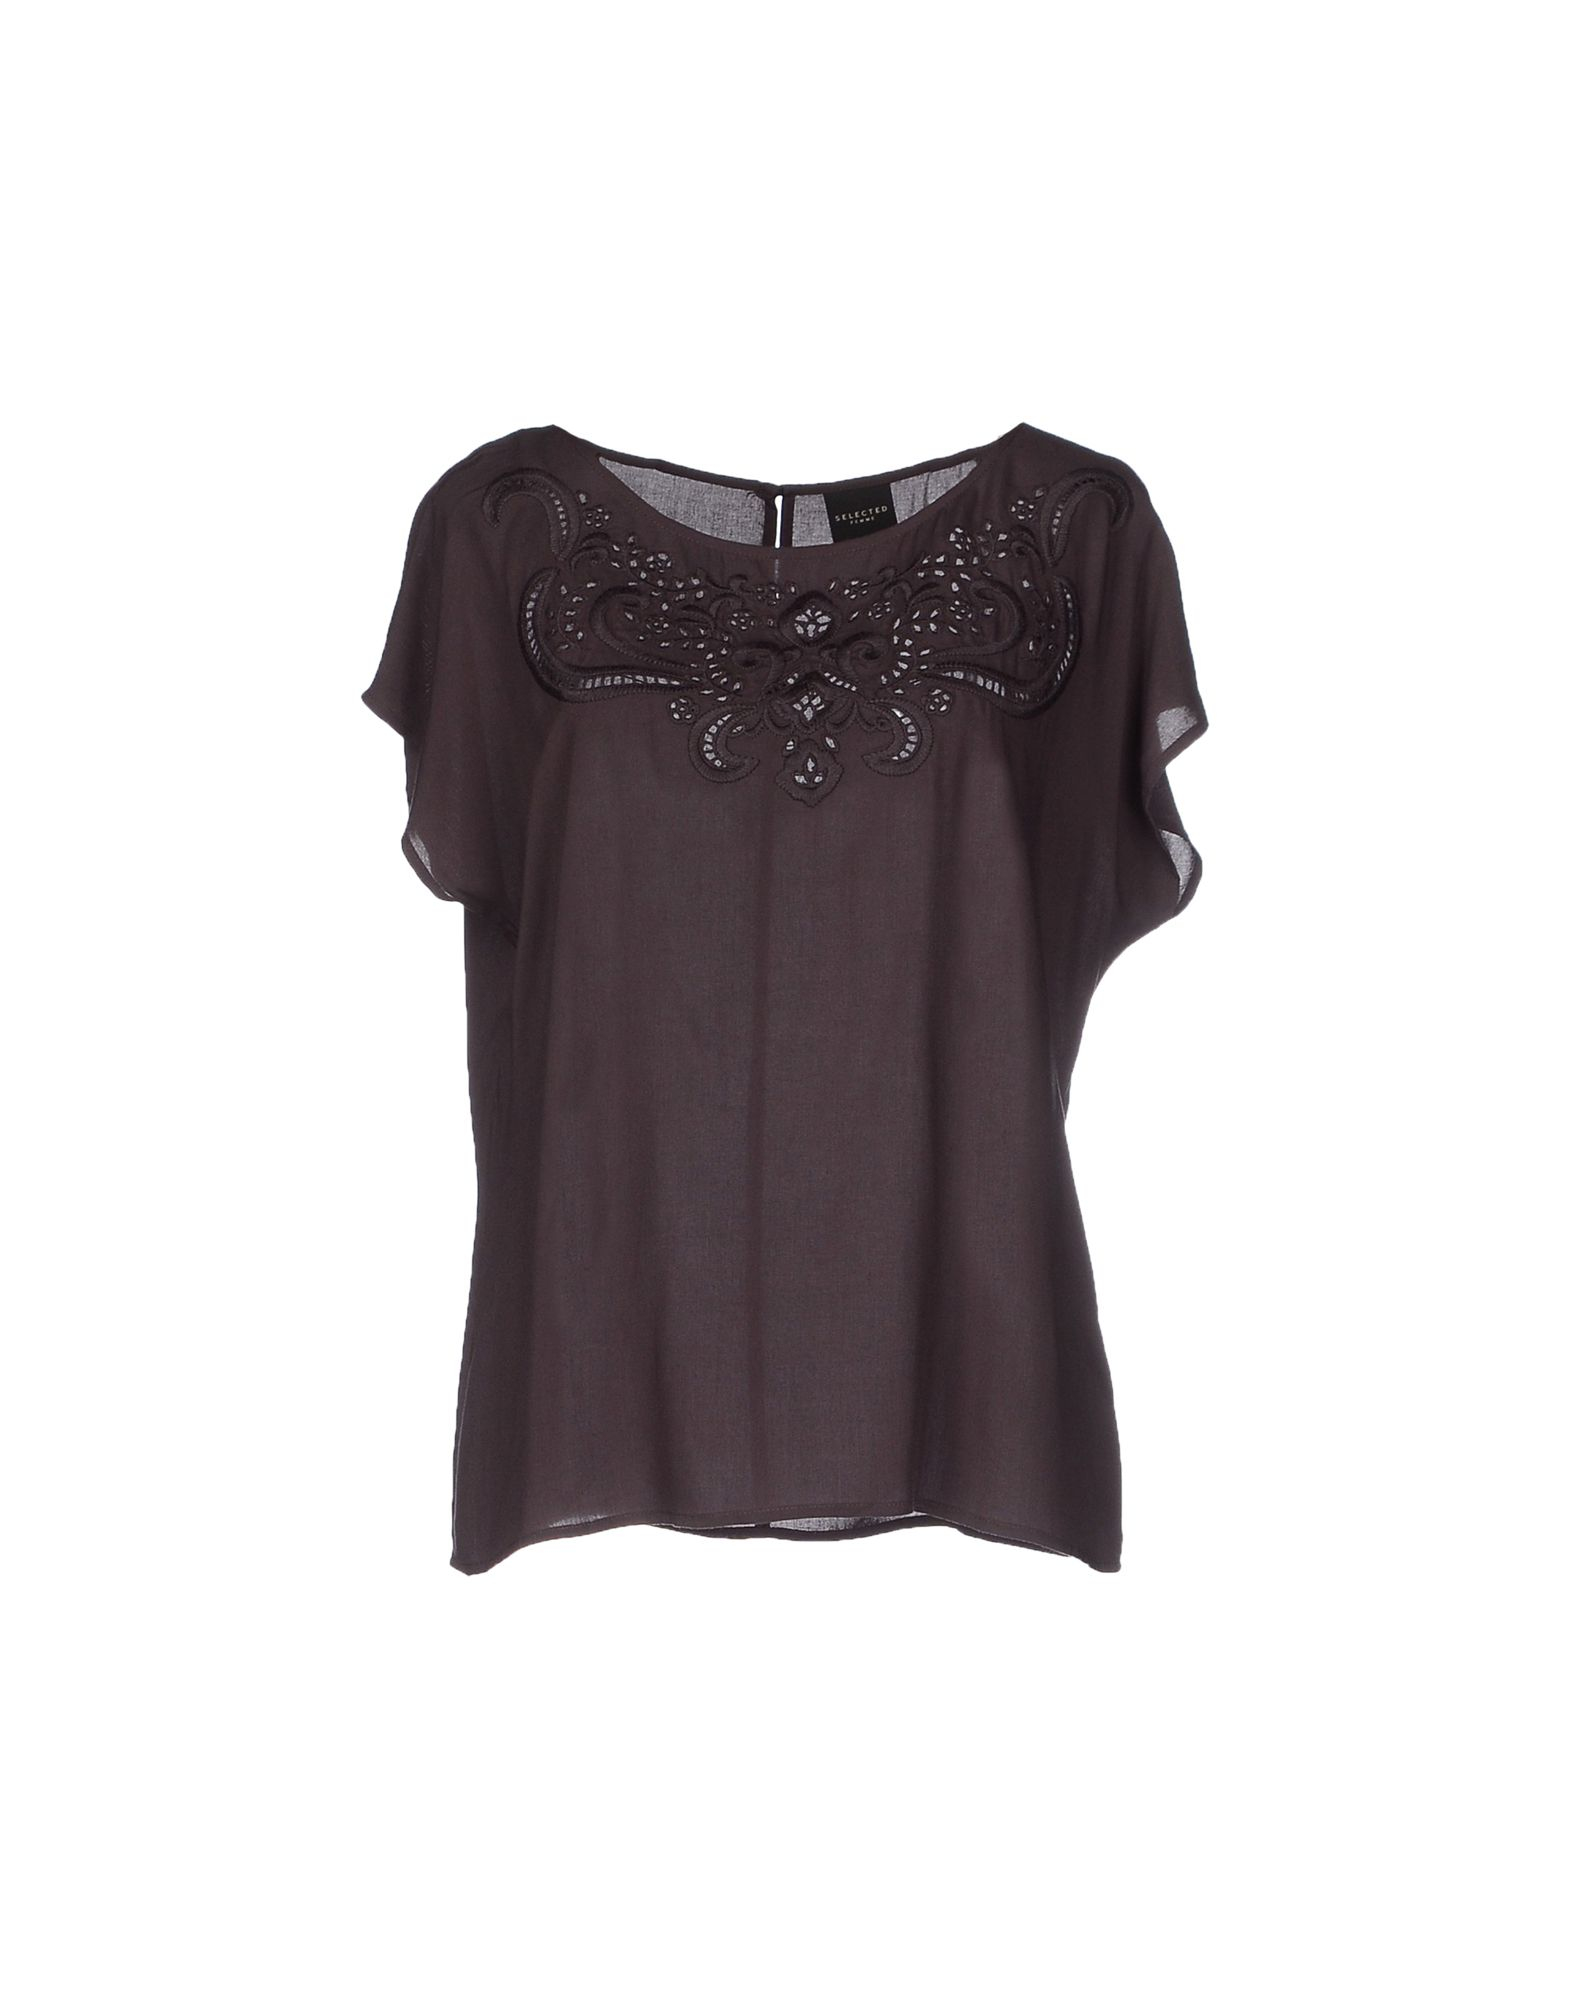 Lyst - Selected Blouse in Brown